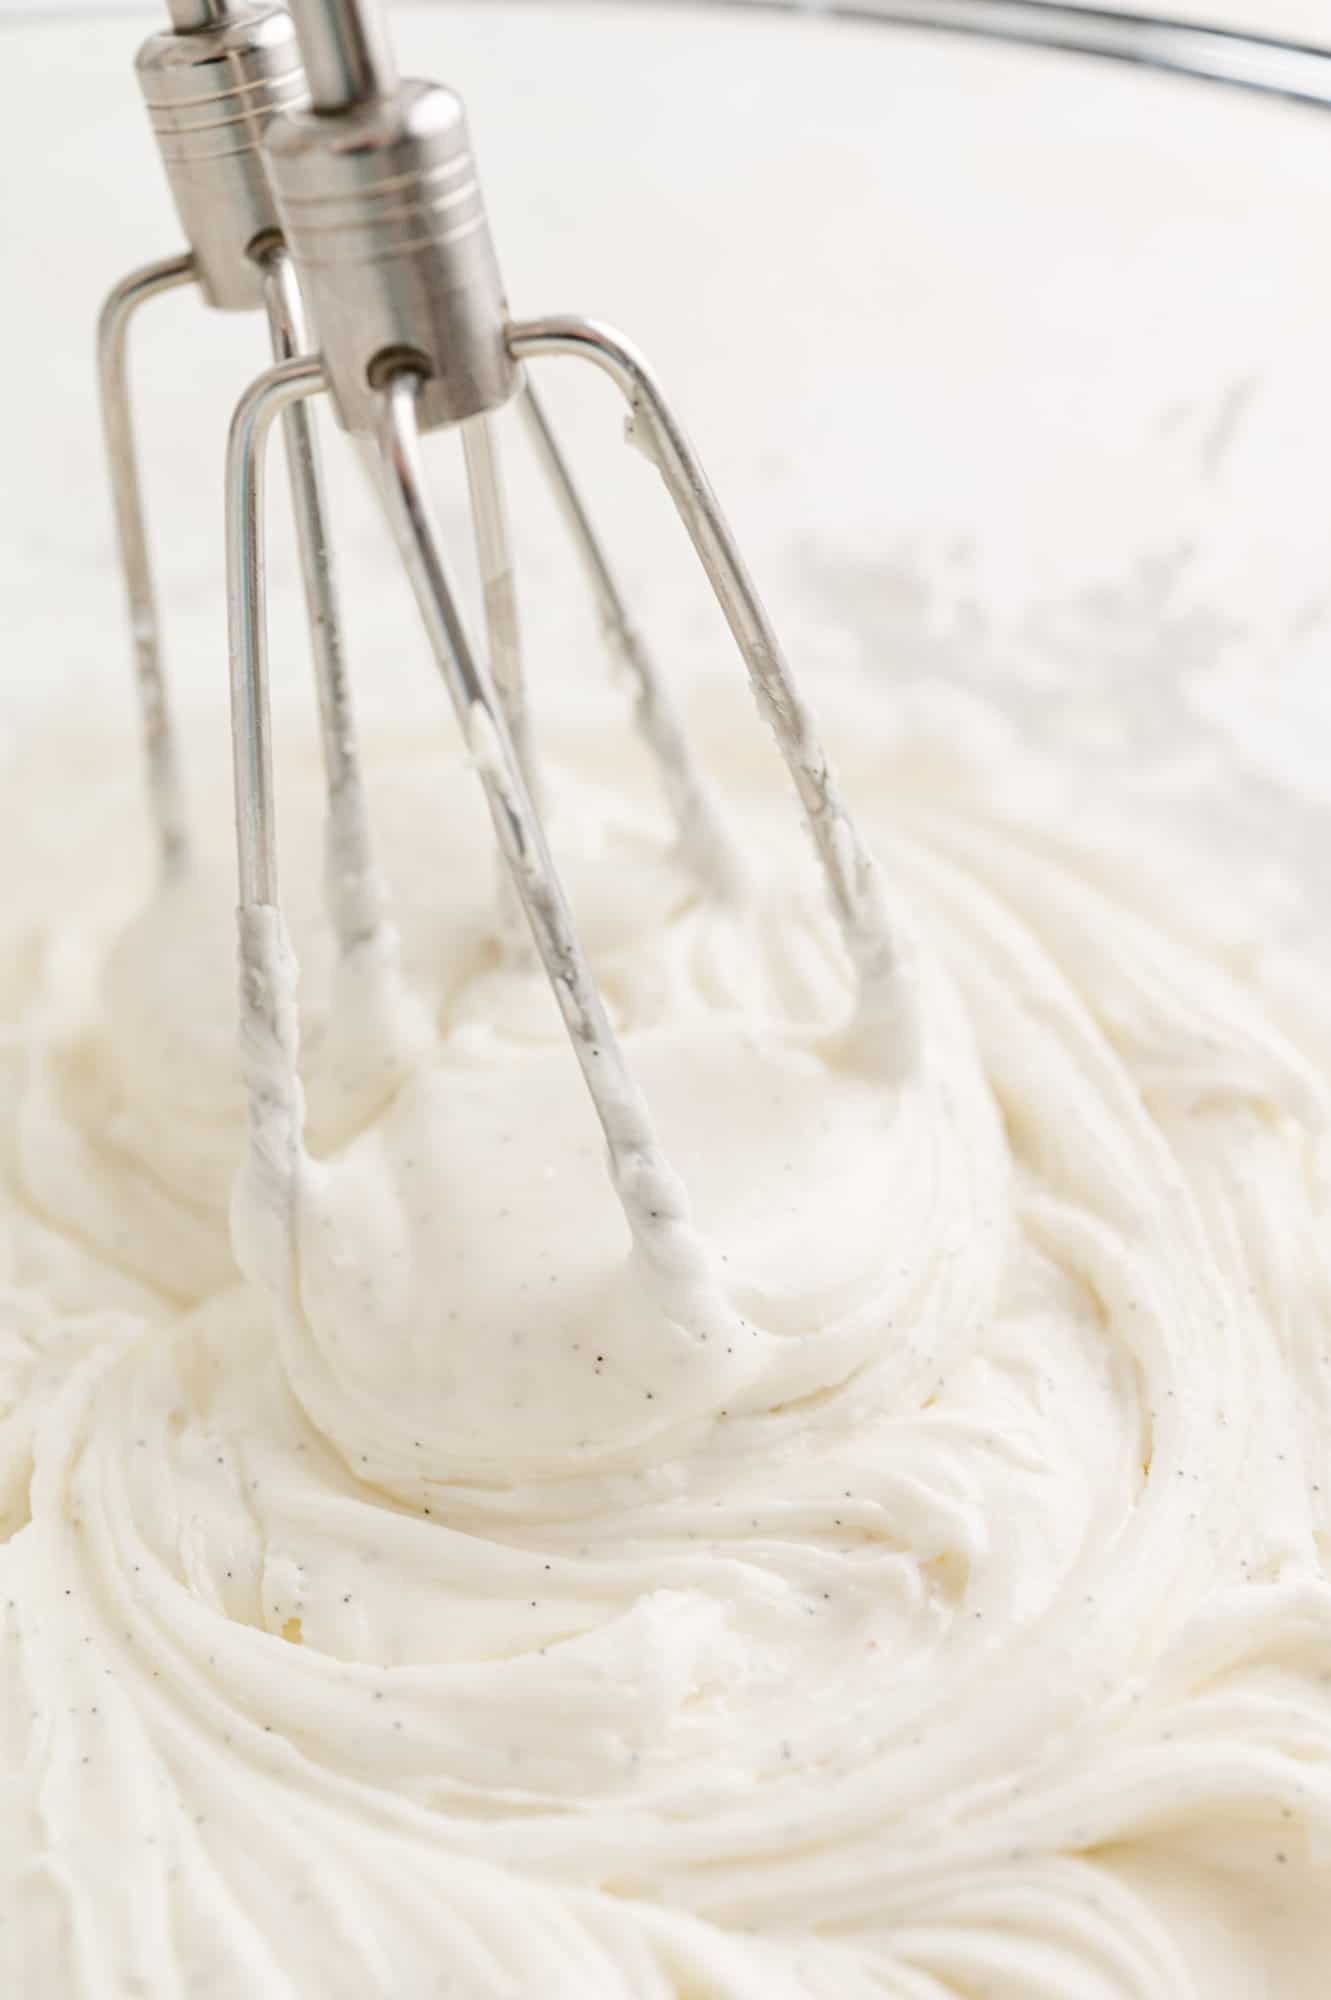 Two electric mixer attachments in a bowl of vanilla buttercream frosting.